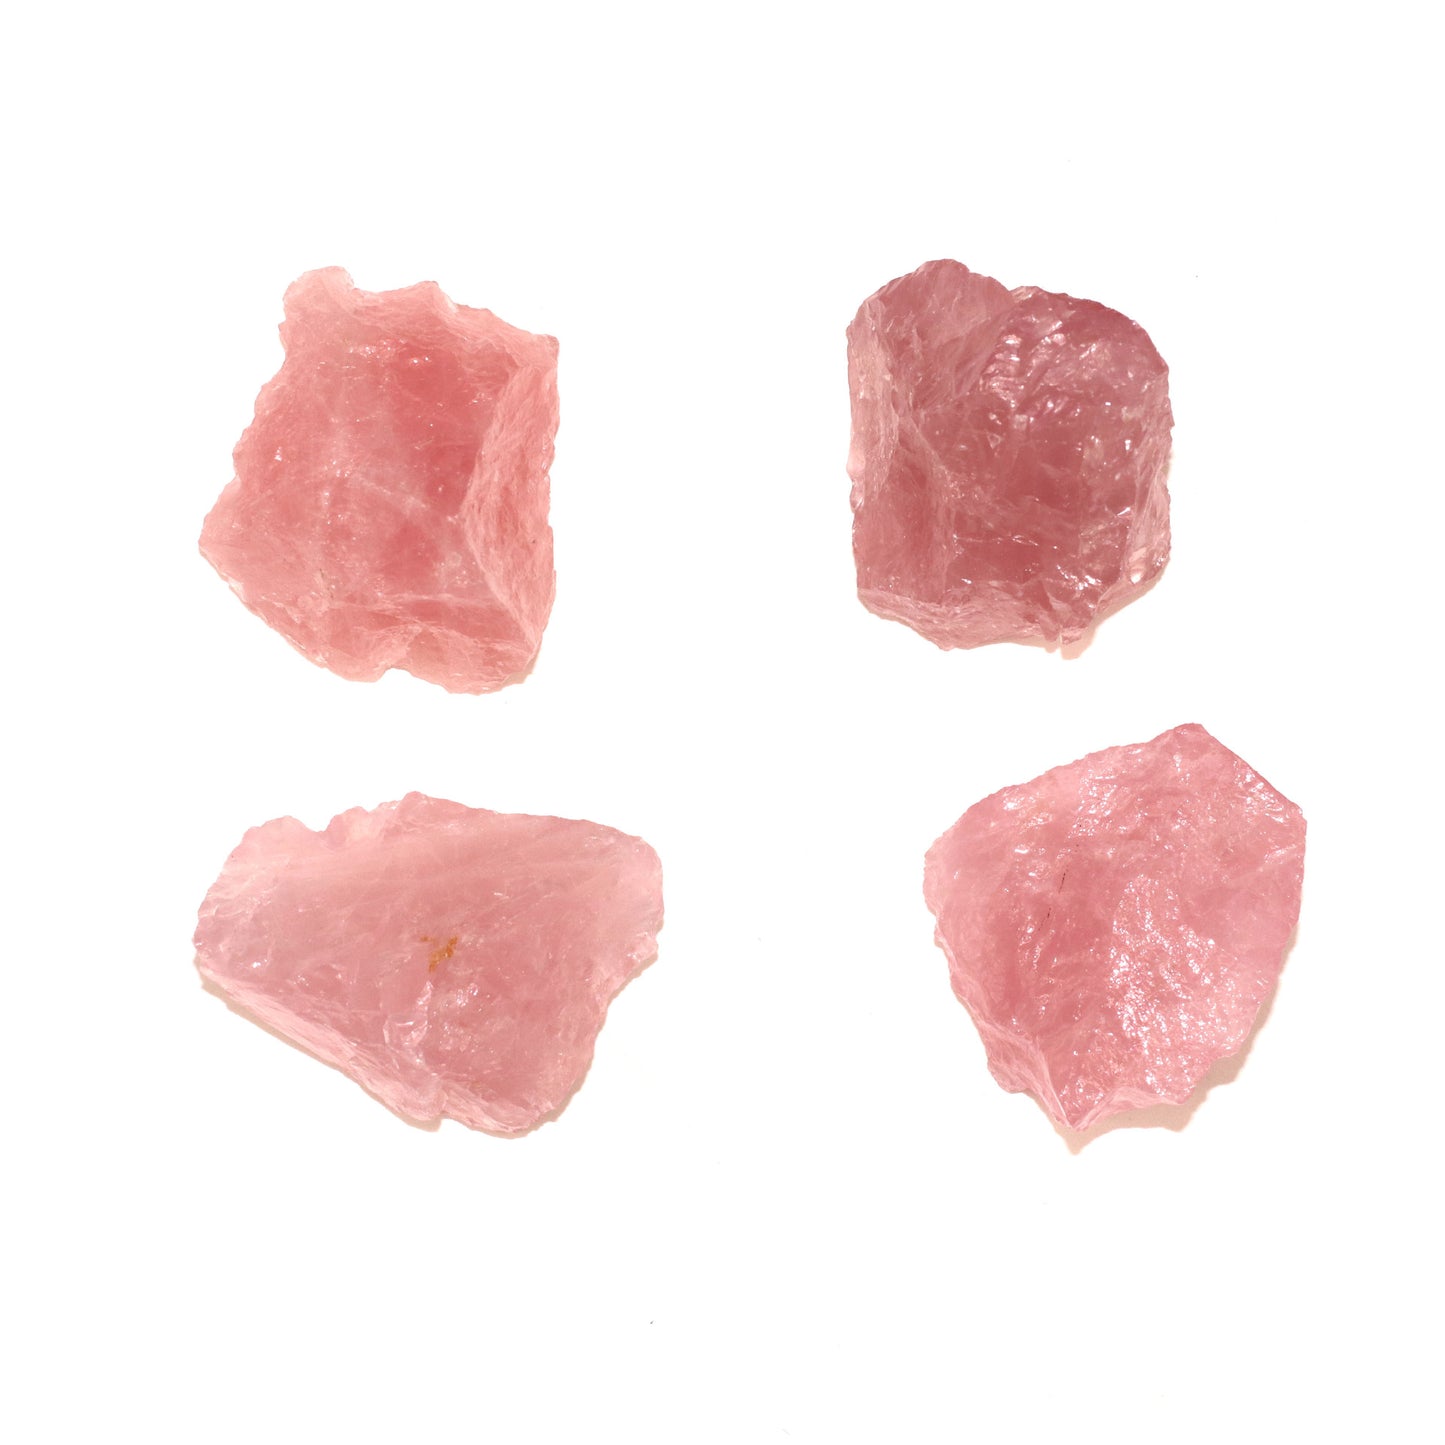 Natural Rough Rose Quartz Raw Stone - 2-4 cm Assorted Sizes - Sold by the kilo - China - NEW922